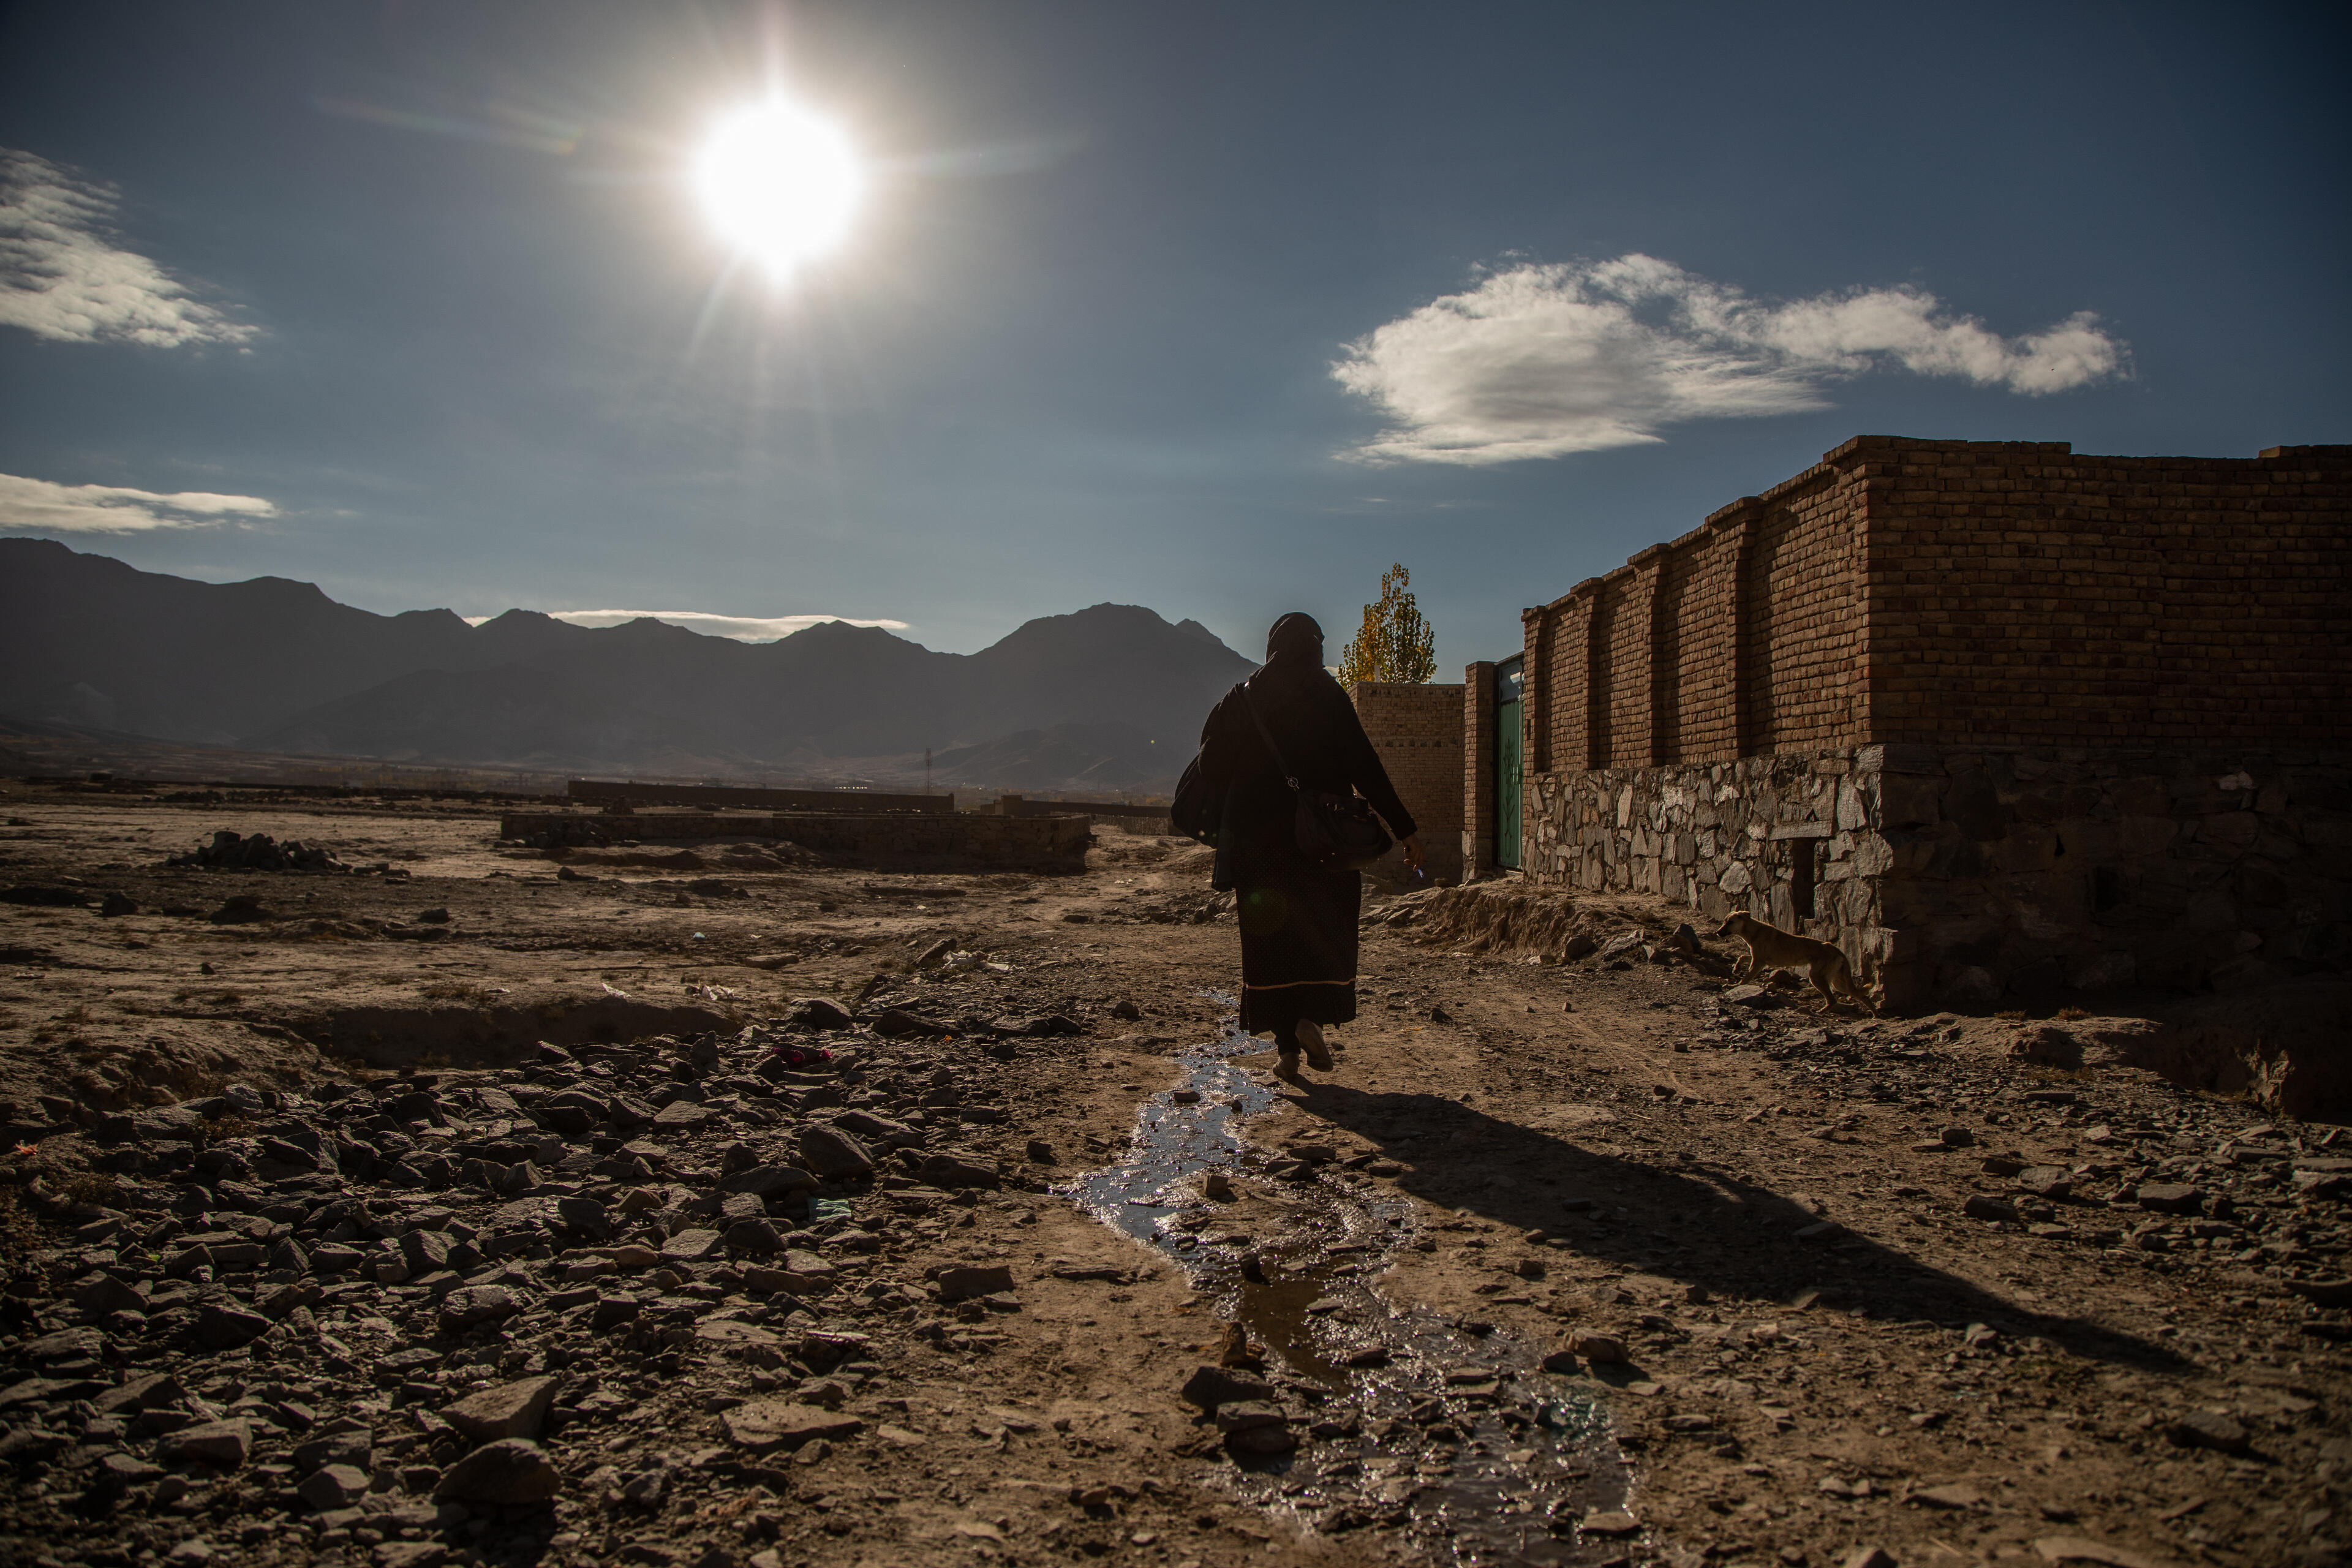 An Afghan aid worker is silhouetted against bright sunlight as she walks to a home in a village in a rocky landscape.